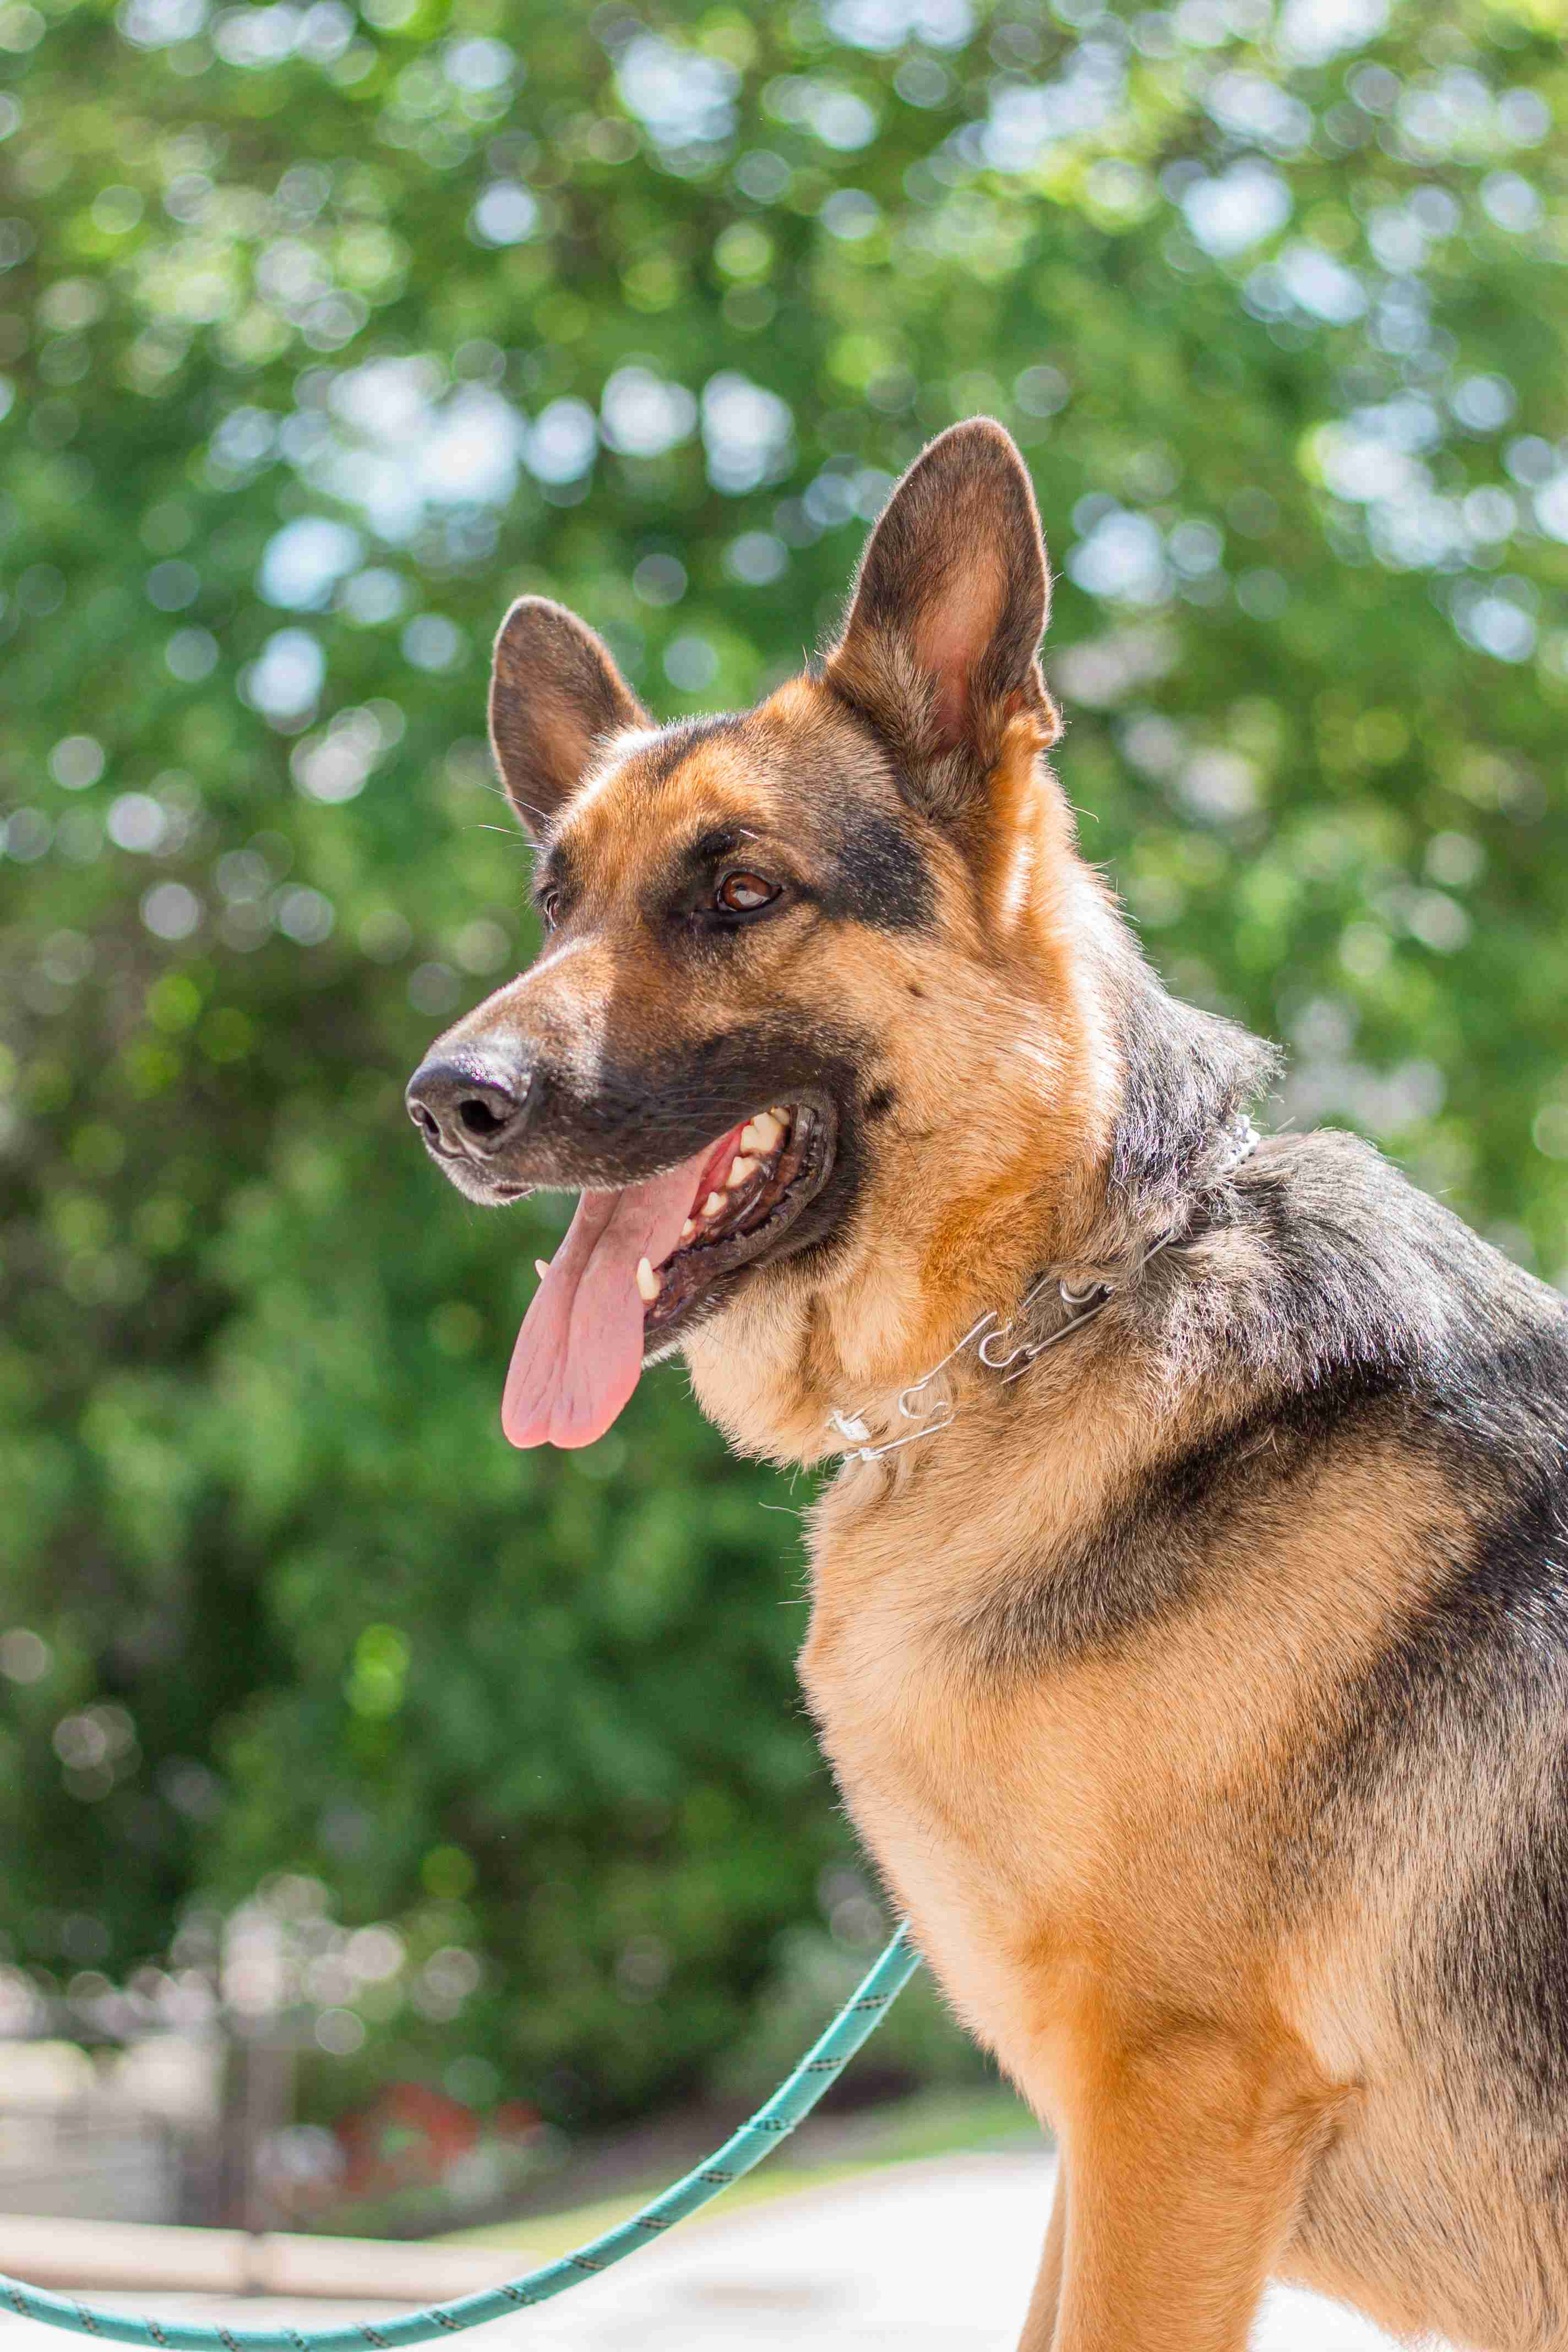 What is the best way to prevent separation anxiety in an adult German shepherd?